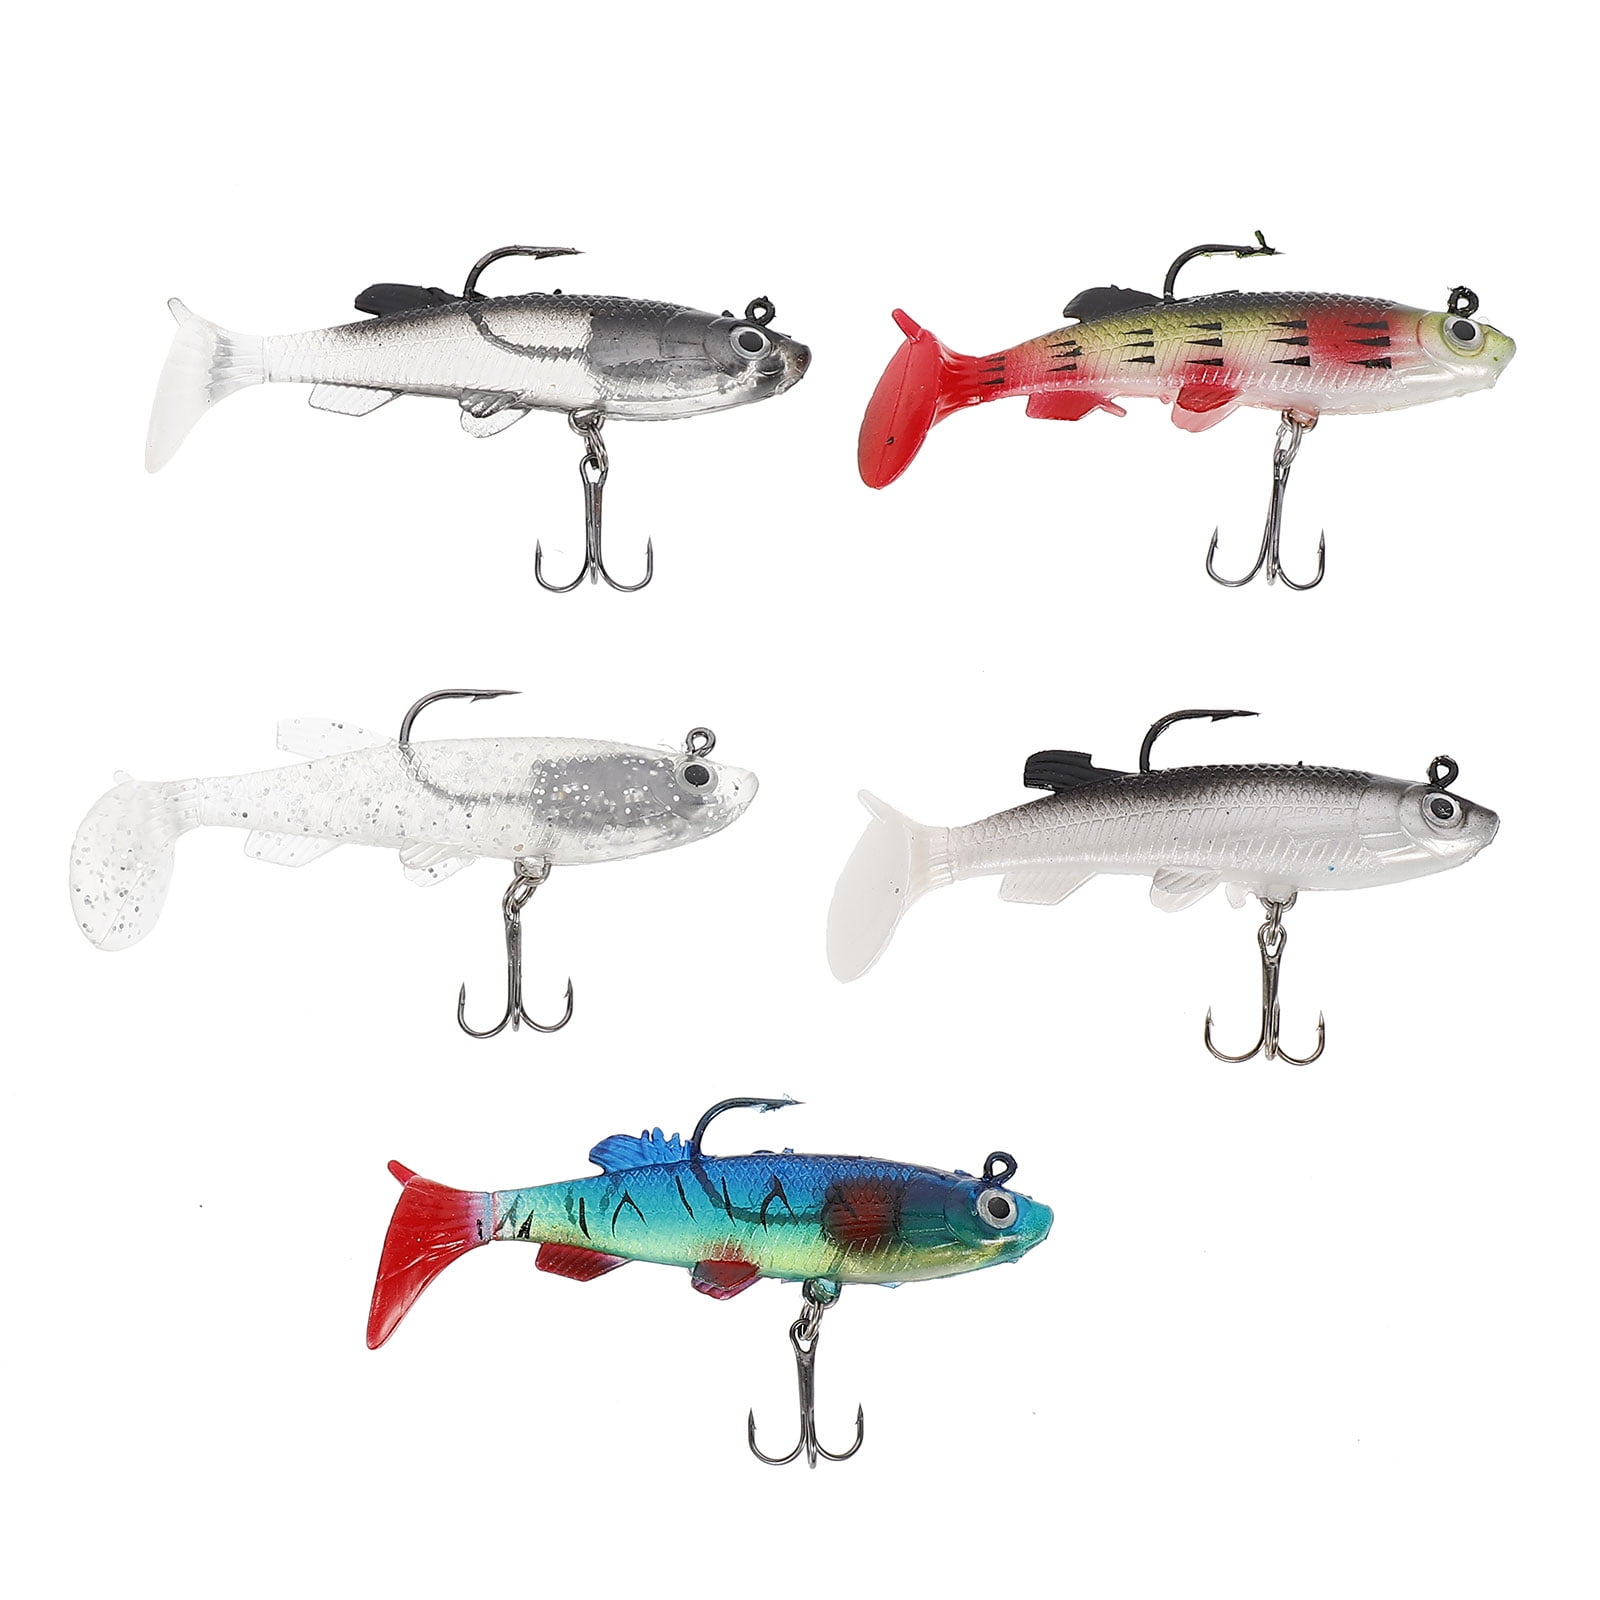 THKFISH Soft Swimbait Soft Plastic Fishing Lures Bass Lures Swim Baits  Lures for Bass Fishing Worms Fishing Bait for Bass Trout Walleye Color 2-L#